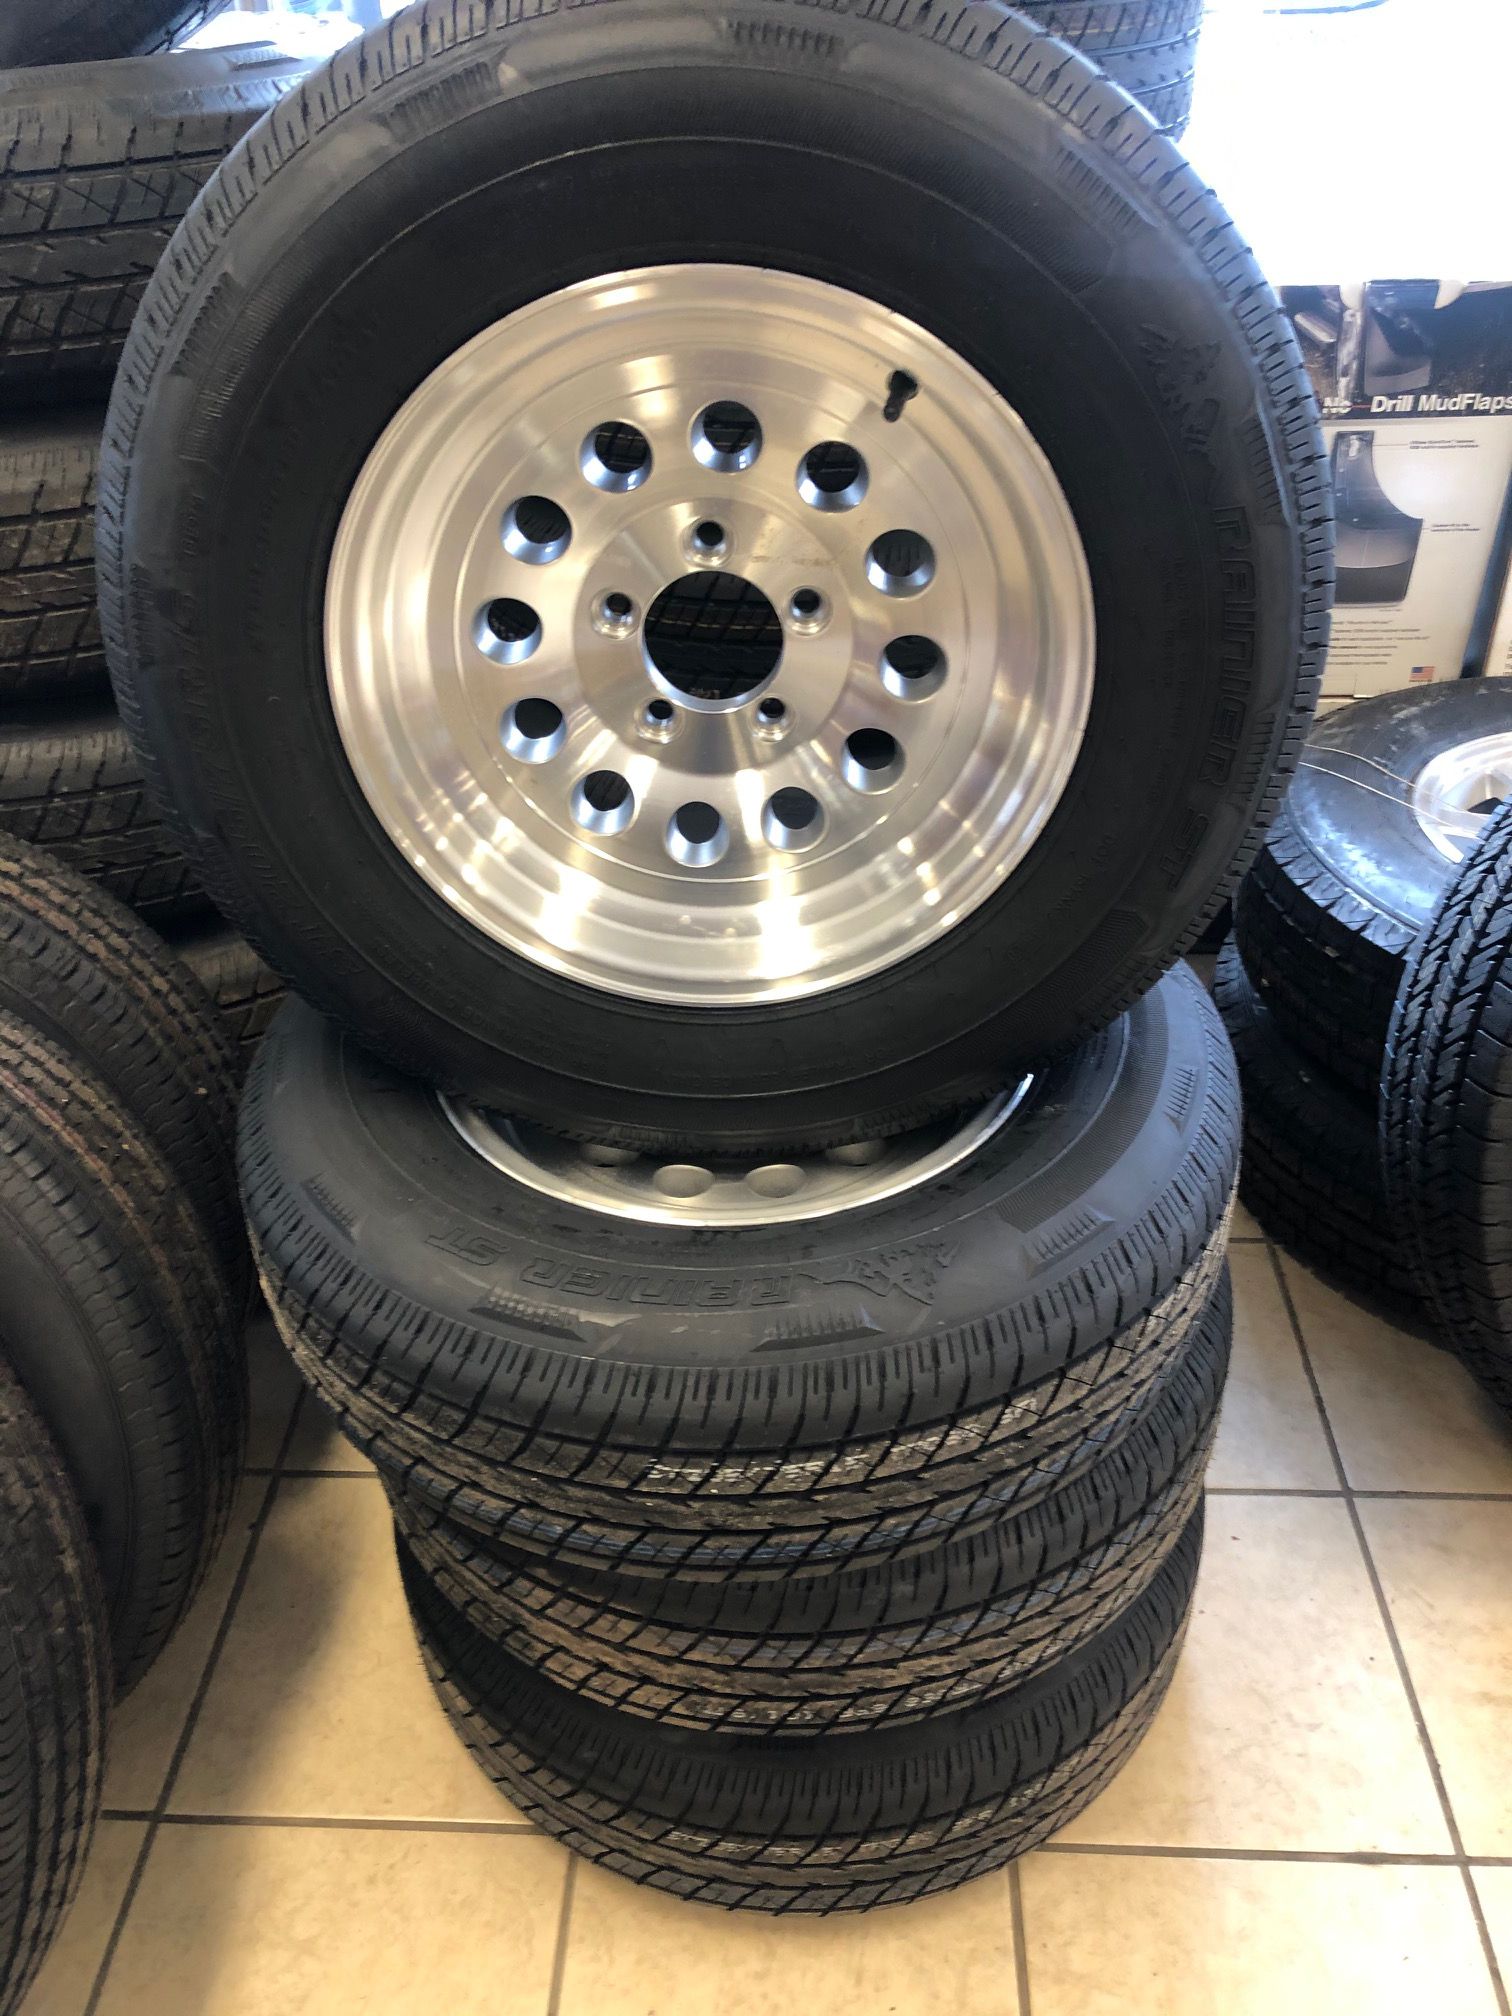 Trailer tires aluminum rims 15" 5 lug - Radial tires - 205/75/15 on 5 lug aluminum rim. Includes center cap and lugs - We will install for free